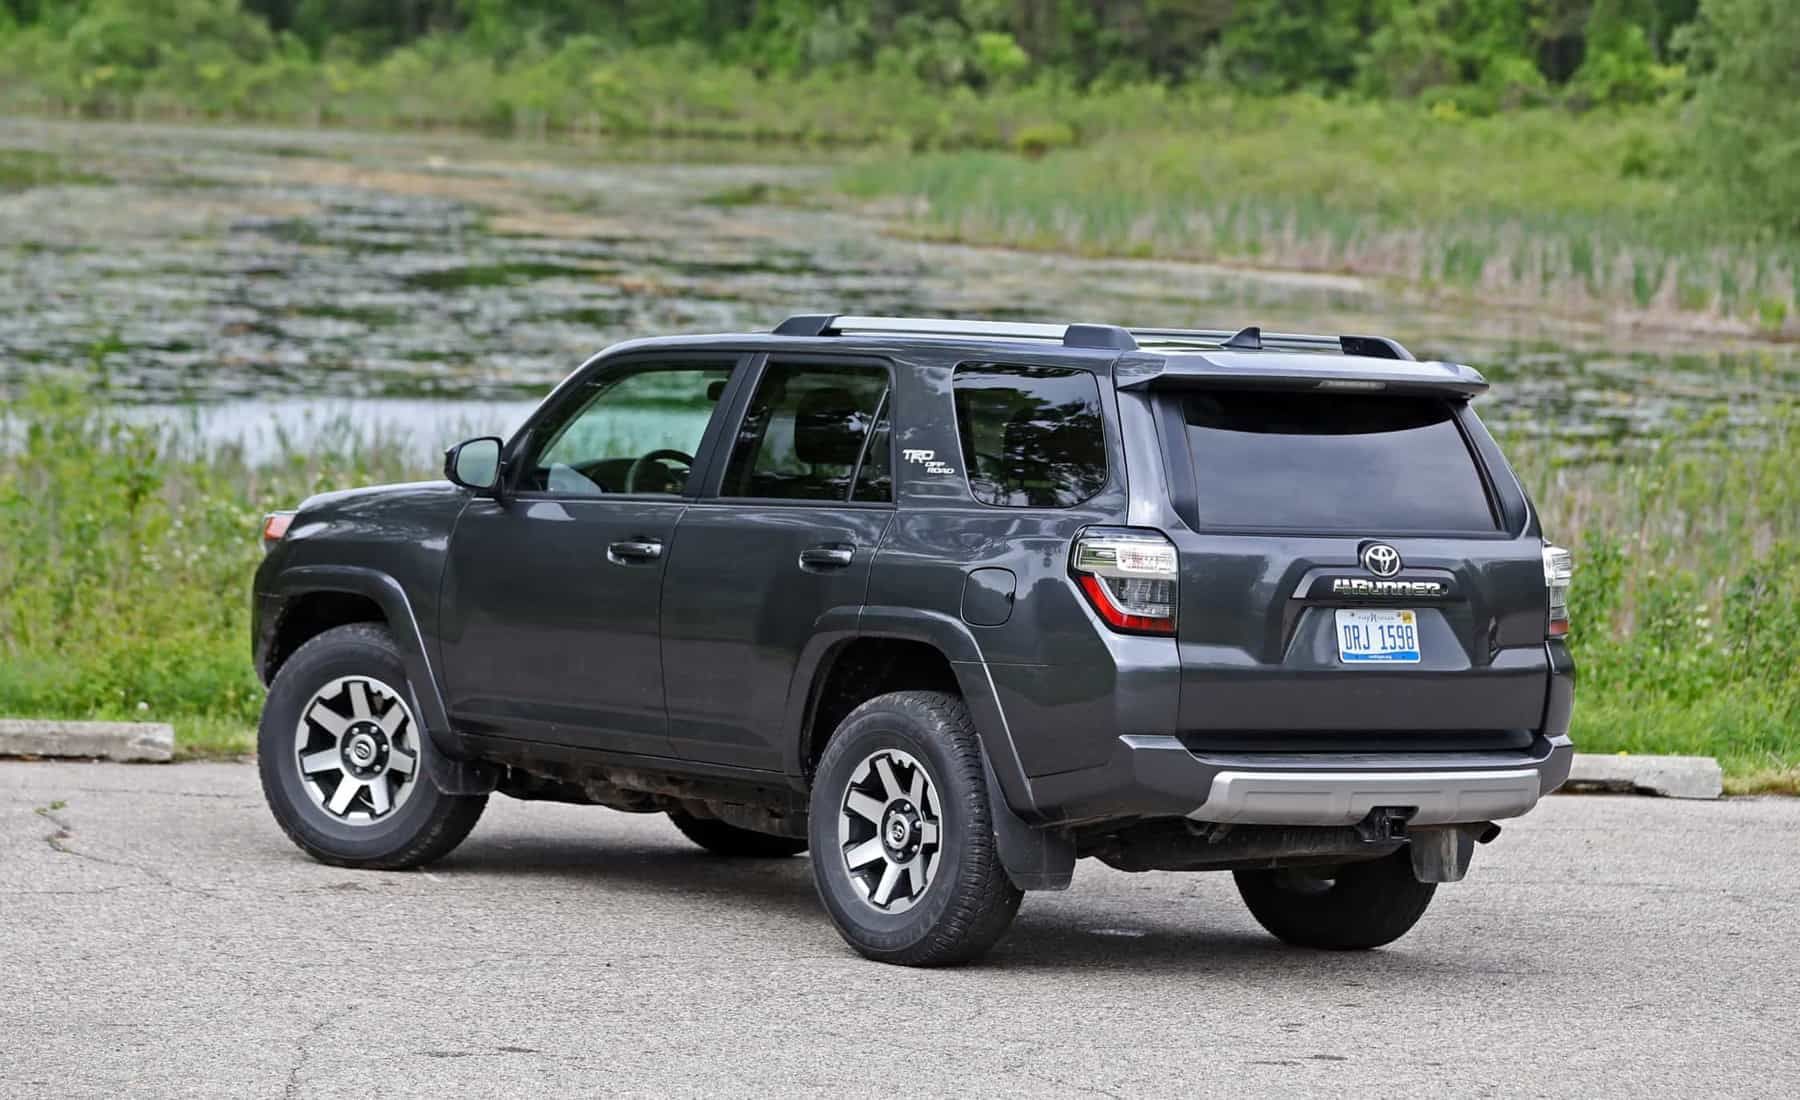 2017 Toyota 4Runner TRD Off Road 4WD Exterior Side And Rear (View 35 of 40)